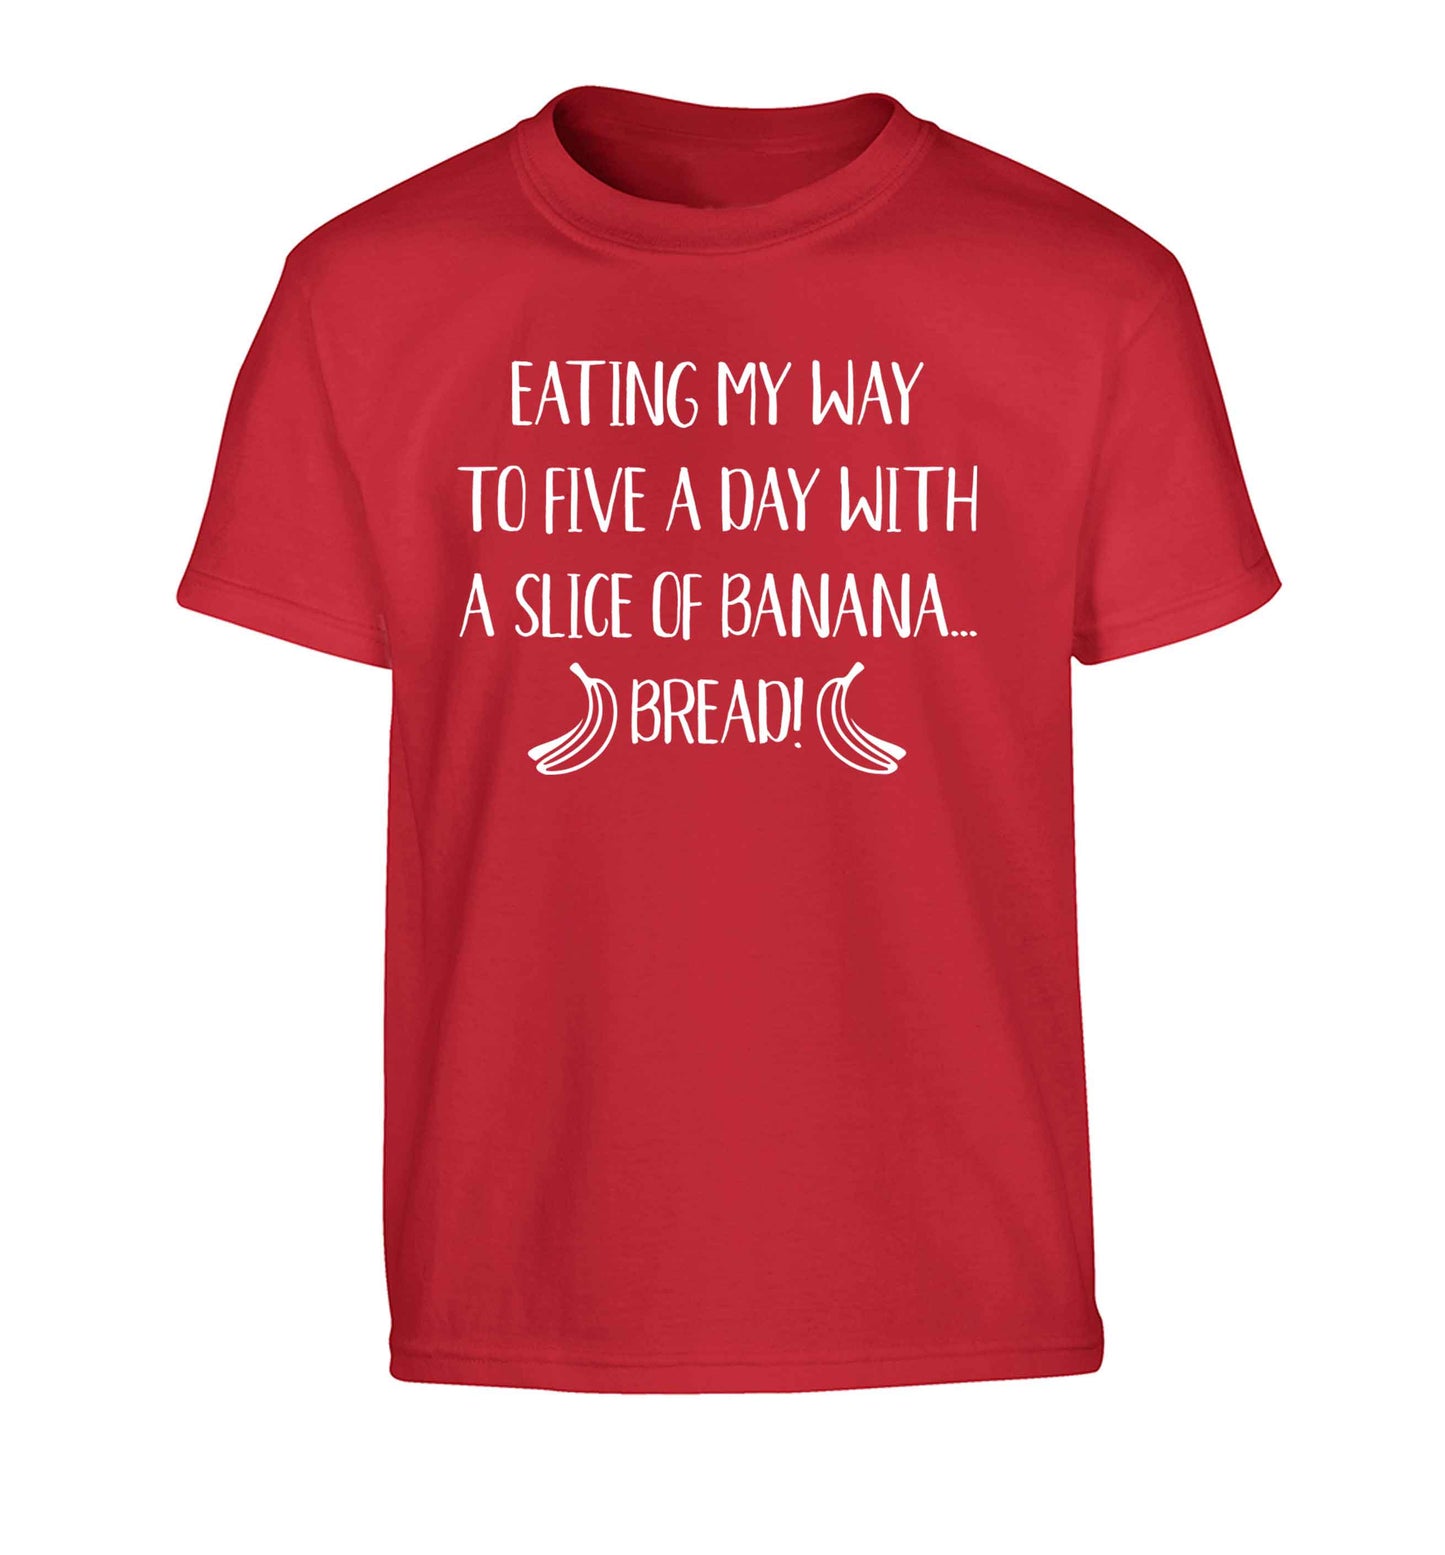 Eating my way to five a day with a slice of banana bread Children's red Tshirt 12-13 Years